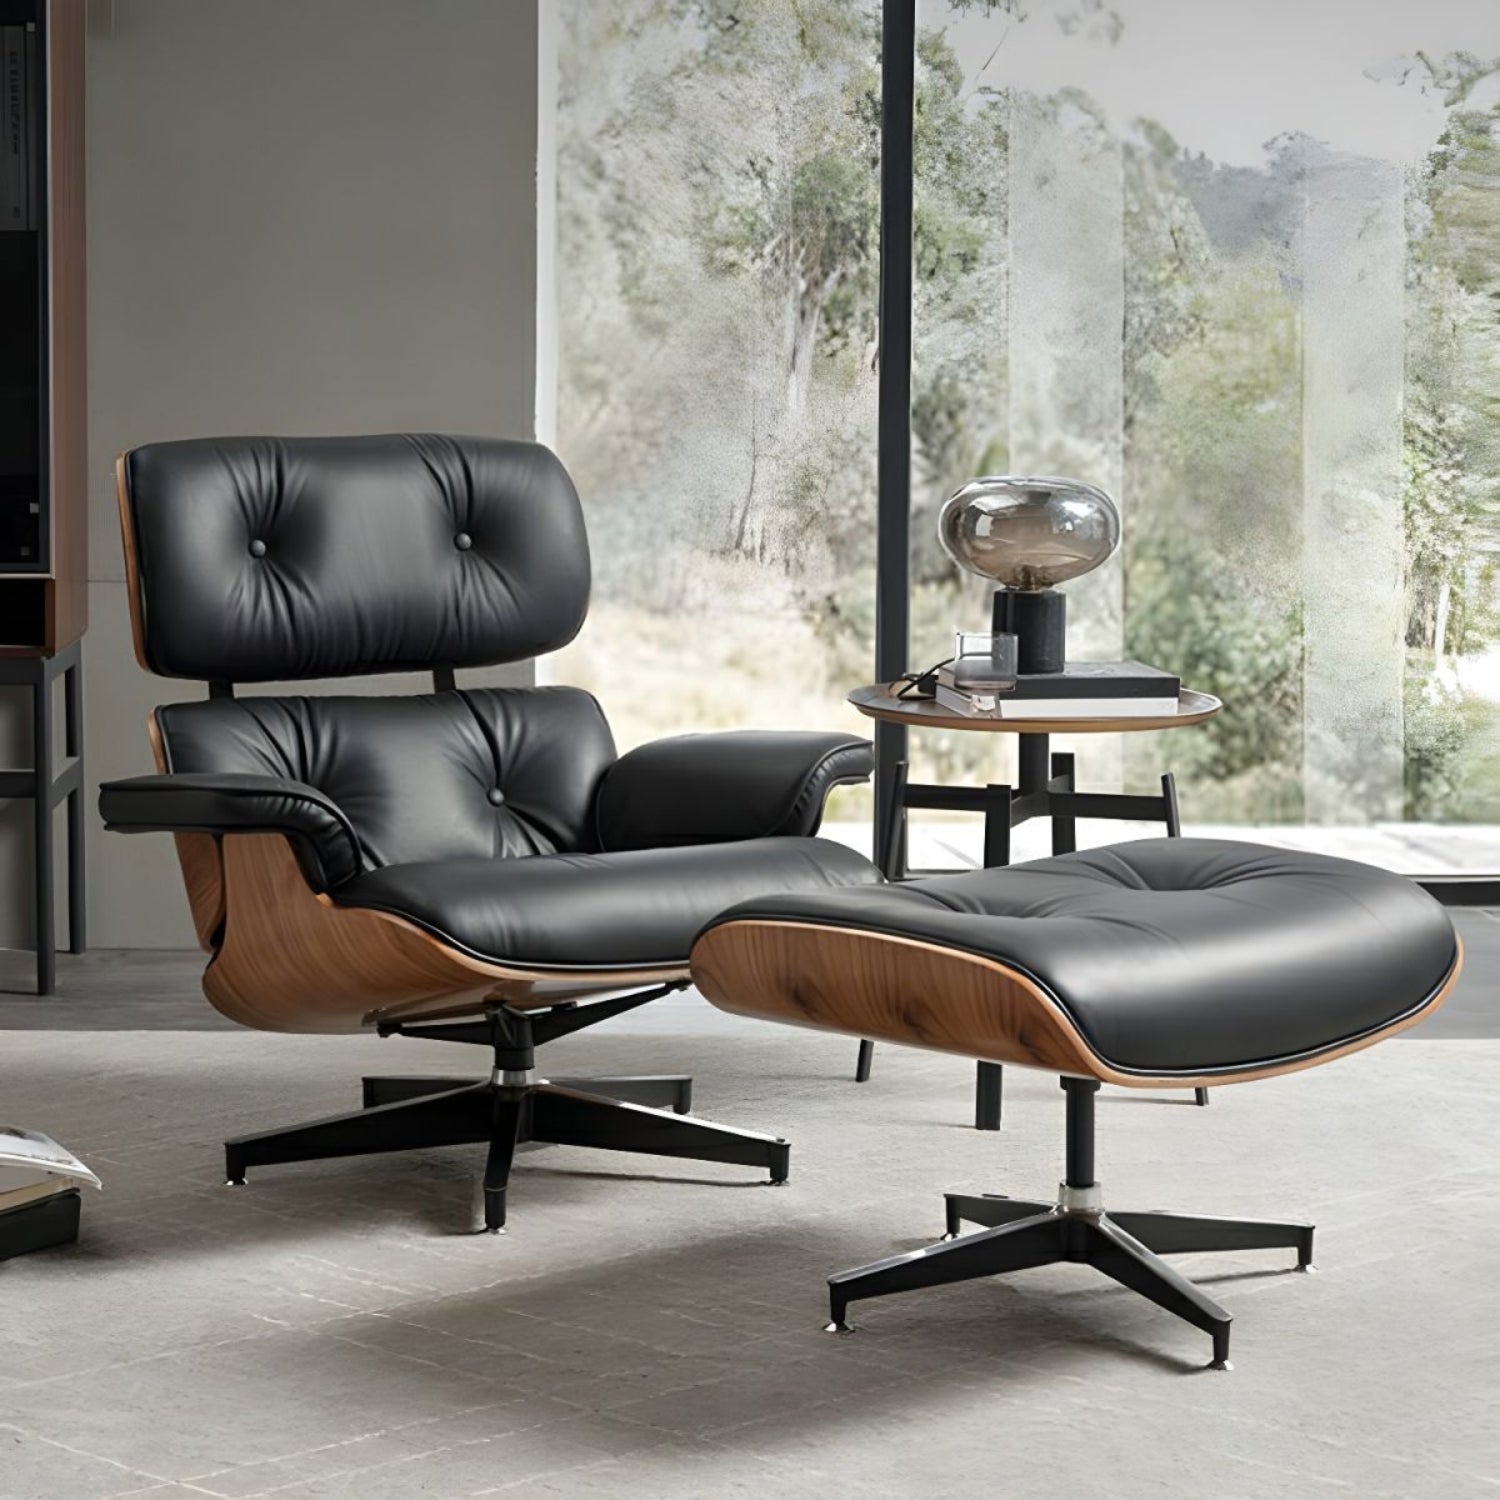 A sleek Eames lounge chair and ottoman, perfect for relaxation and stylish decor.